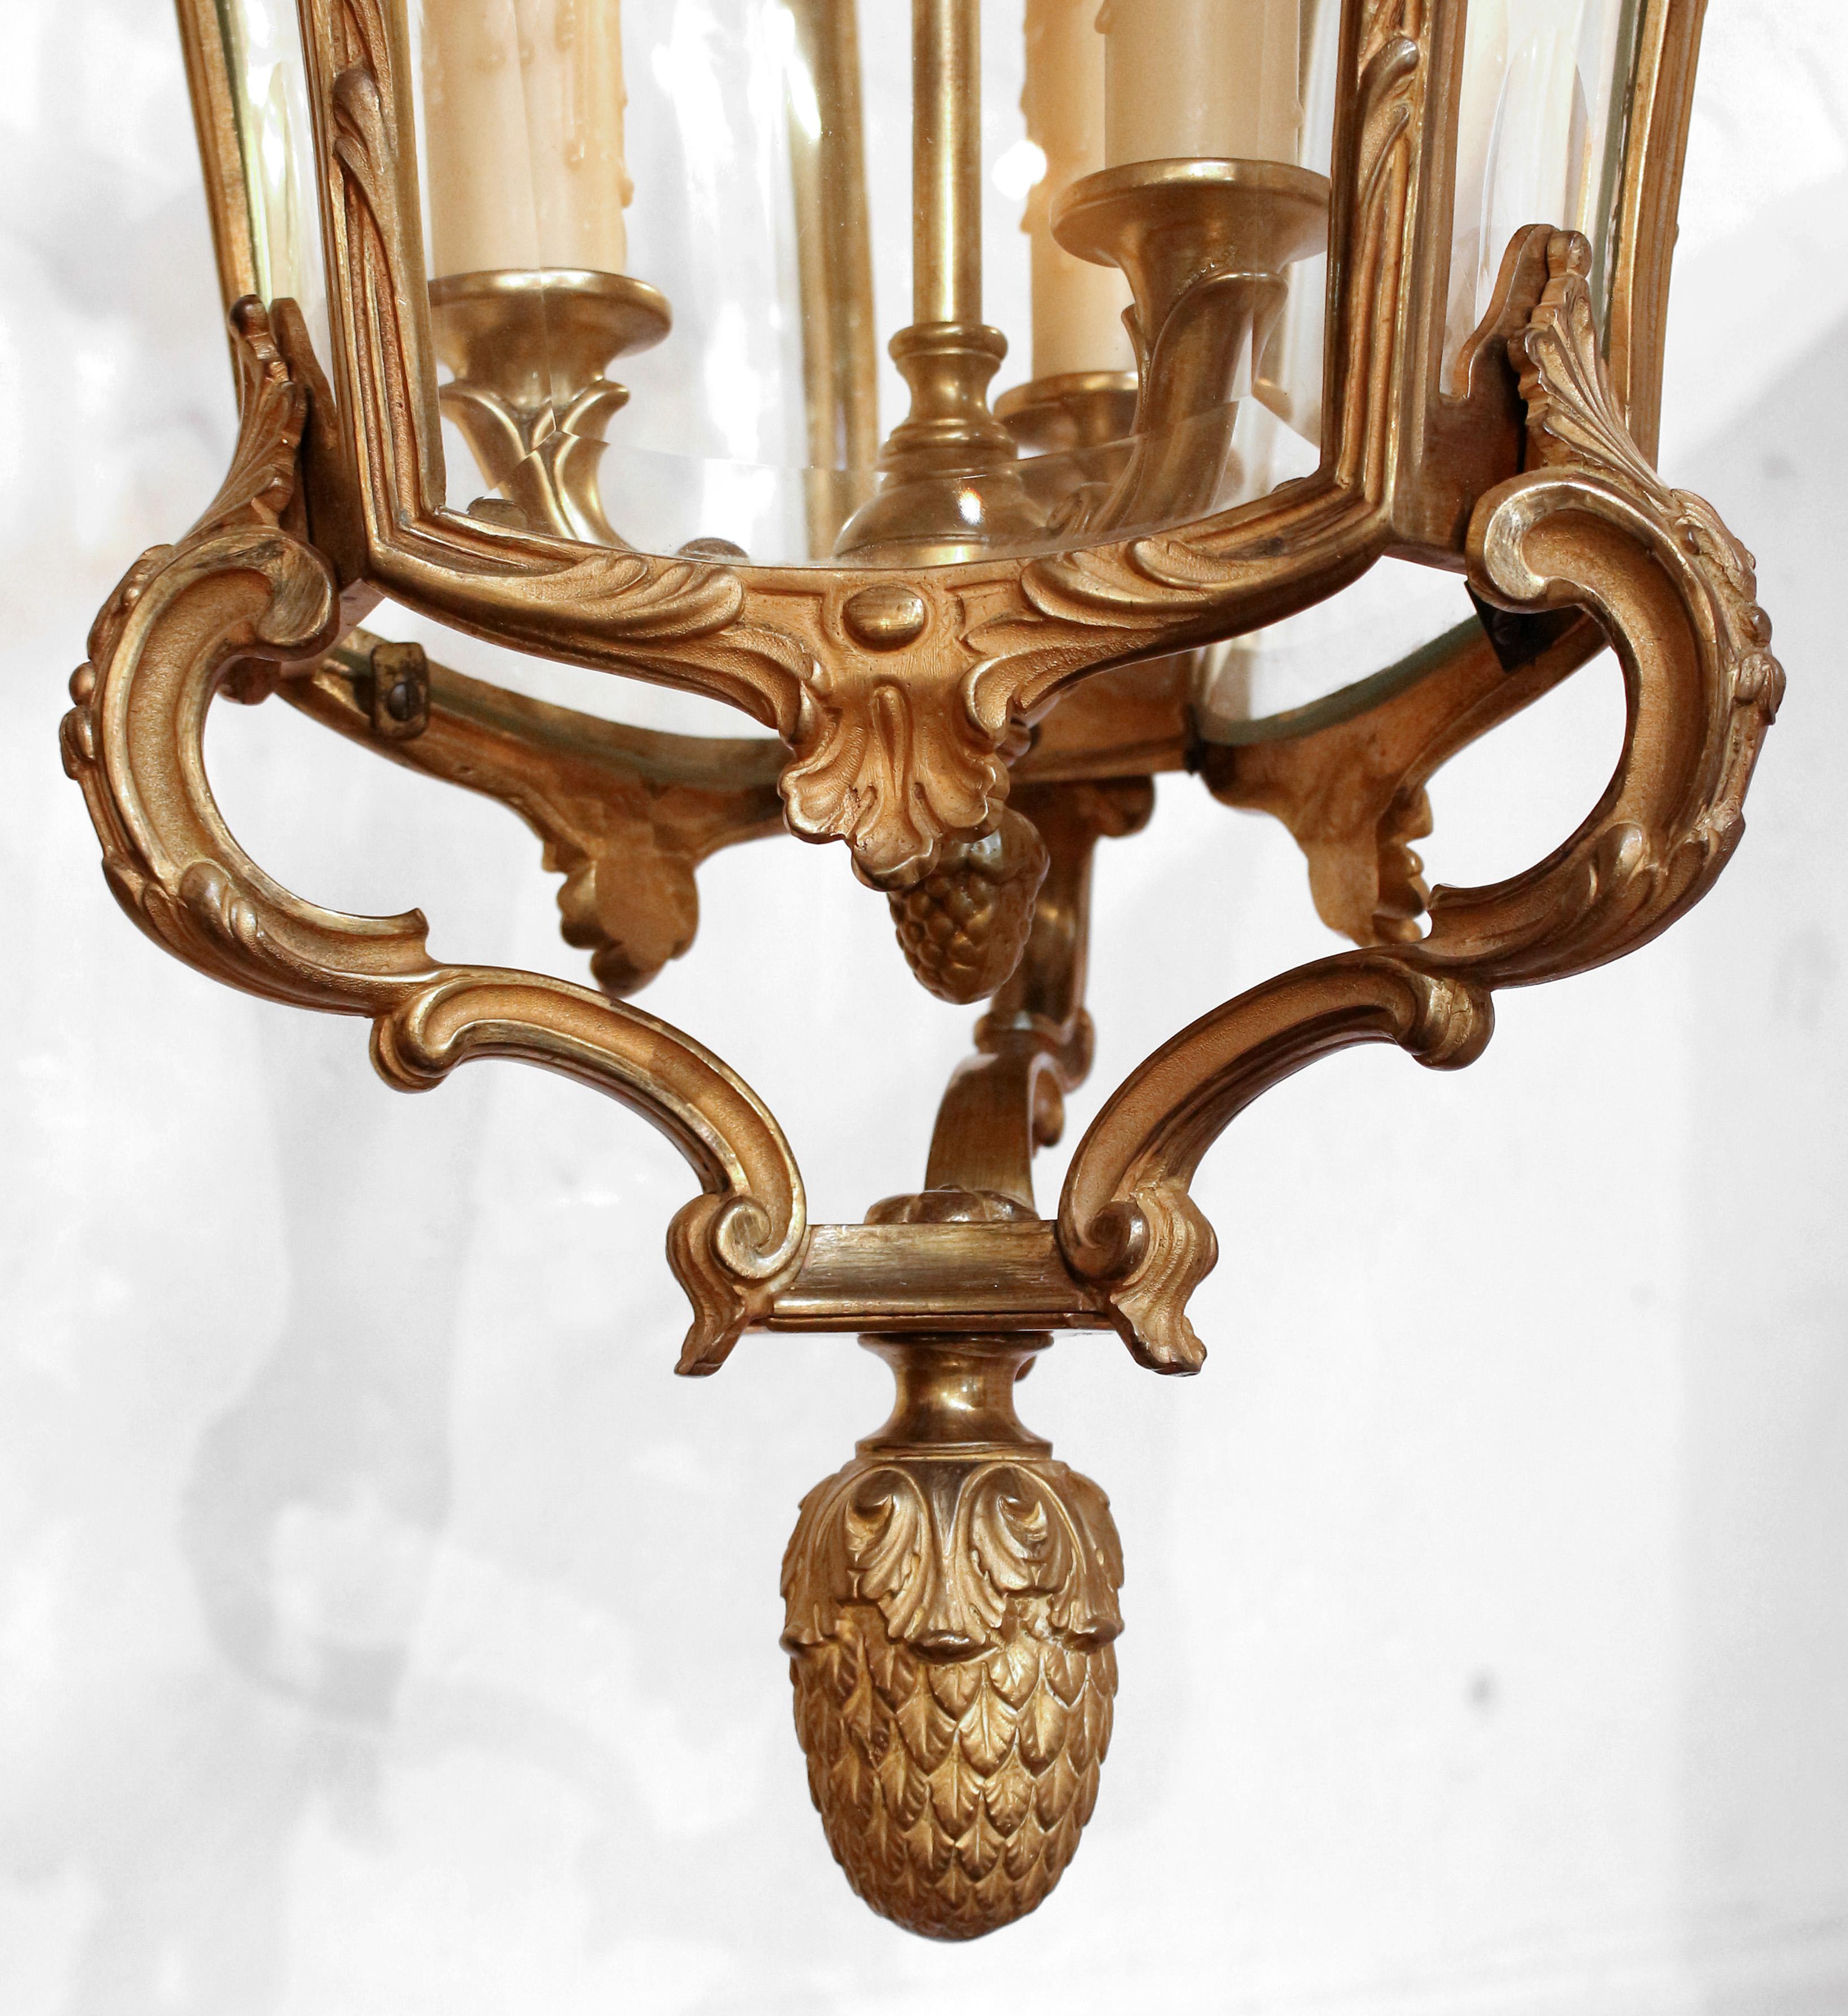 Rococo Early 20th Century French Gilt Bronze & Glass Hall Lantern For Sale